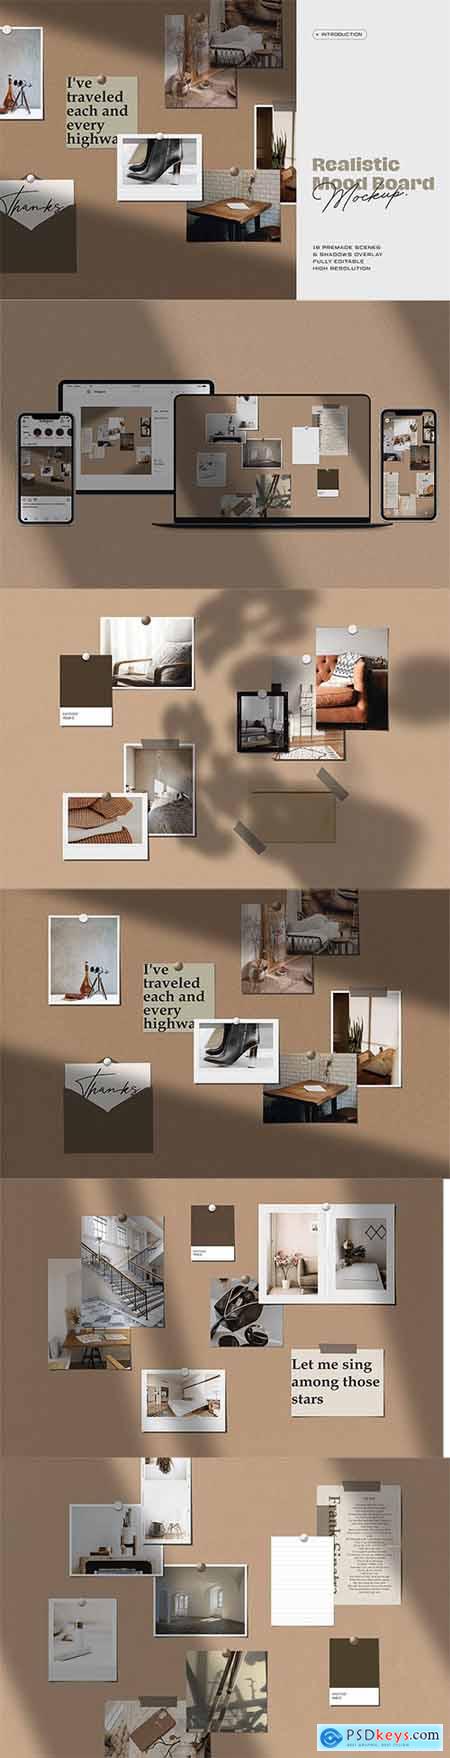 Download Moodboard Mockup » Free Download Photoshop Vector Stock image Via Torrent Zippyshare From ...